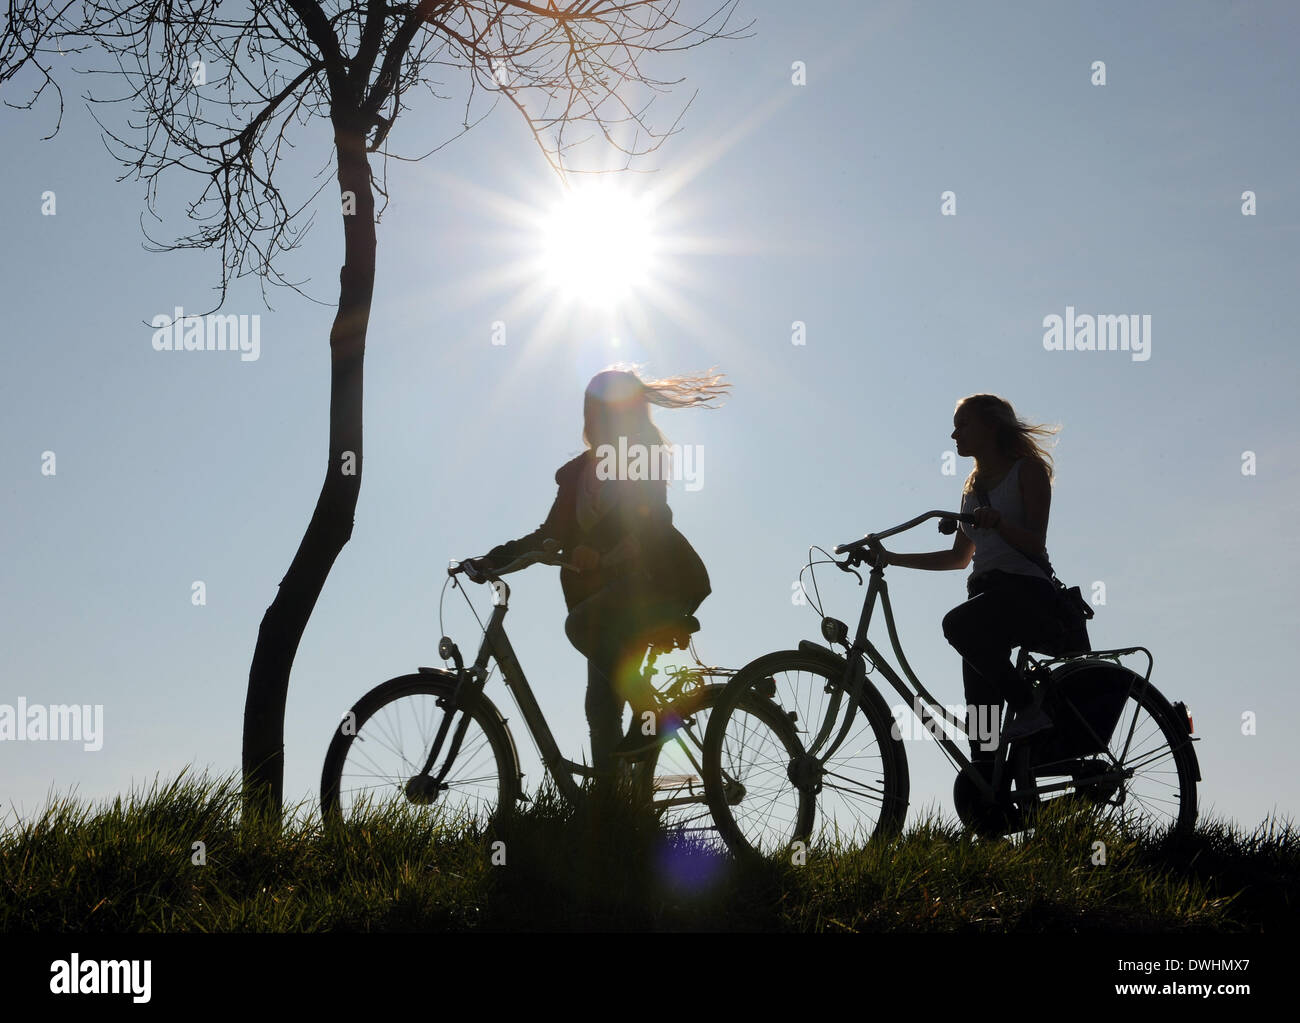 Bruchhausen-Vilsen, Germany. 09th Mar, 2014. Two young cyclists ride on a cycle path in the spring sunshine in Bruchhausen-Vilsen, Germany, 09 March 2014. Photo: INGO WAGNER/dpa/Alamy Live News Stock Photo